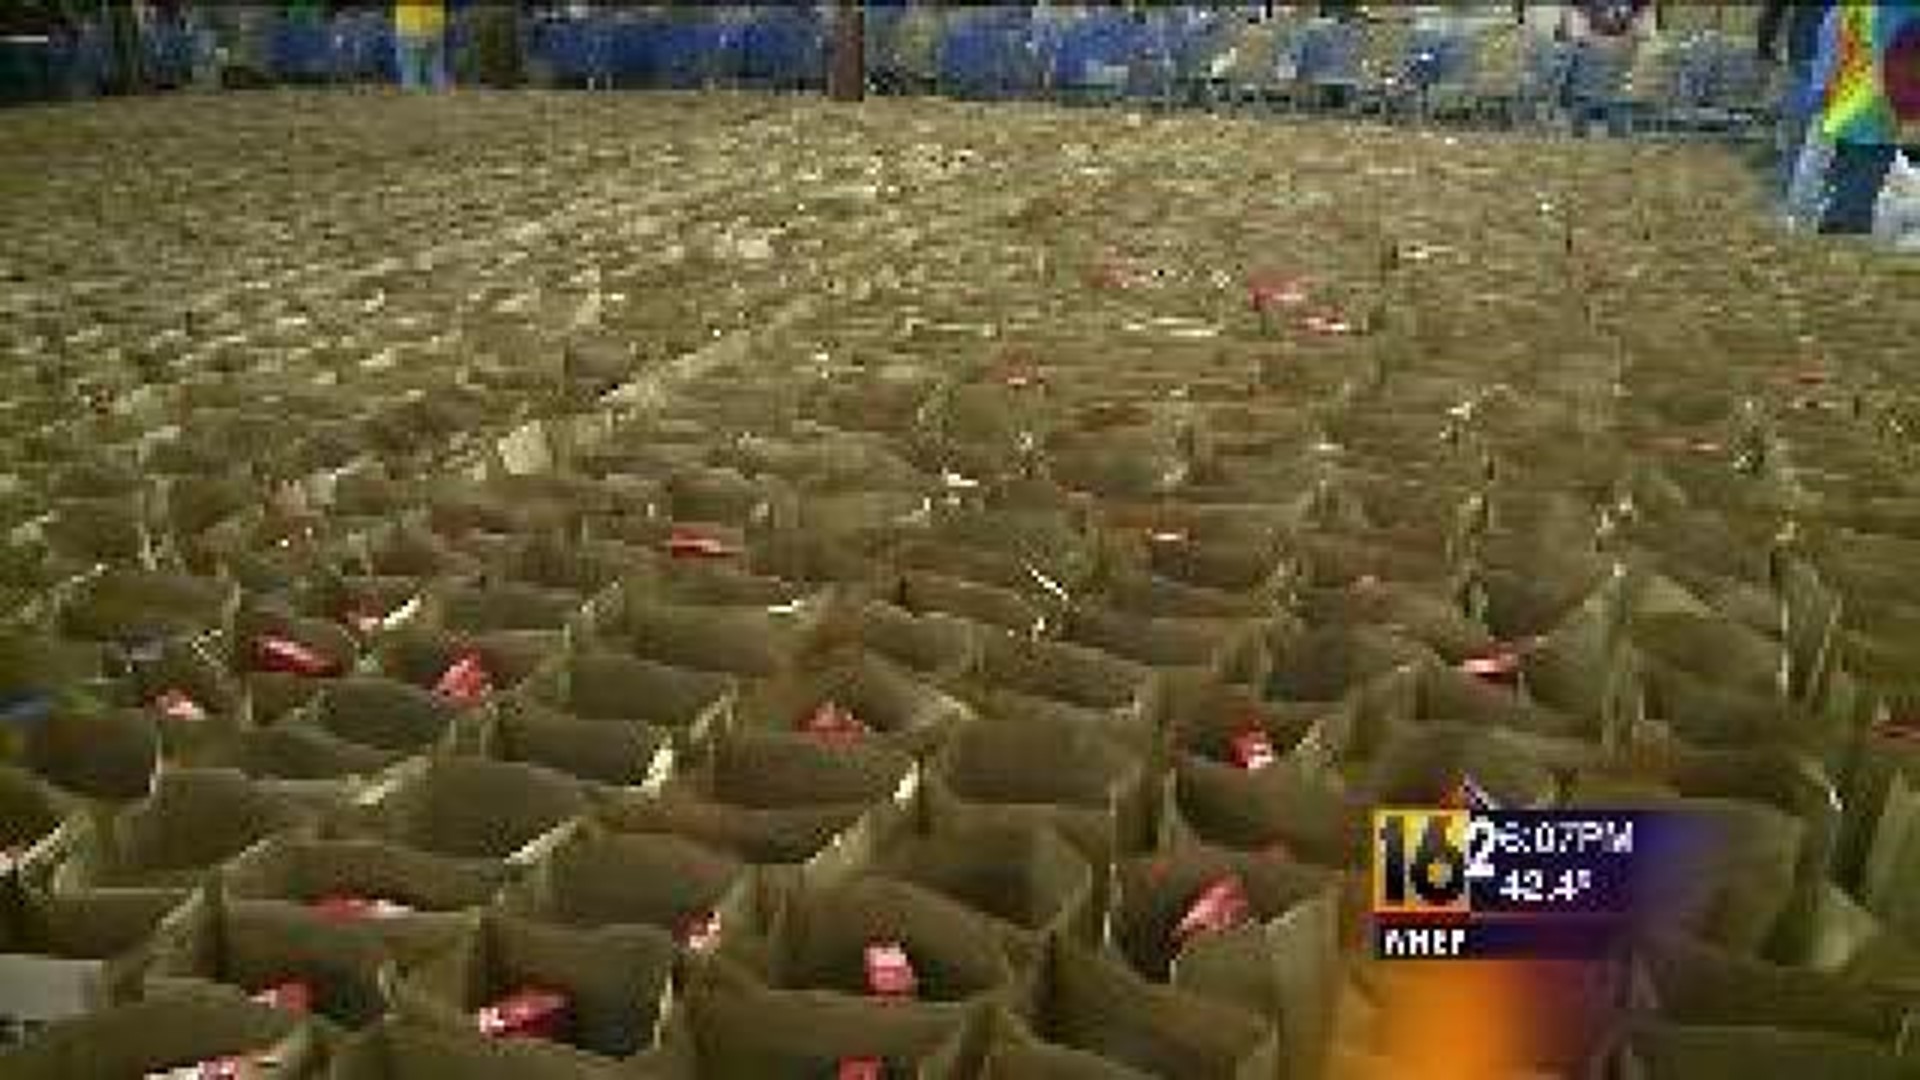 Thanksgiving Food Distribution Helps Thousands